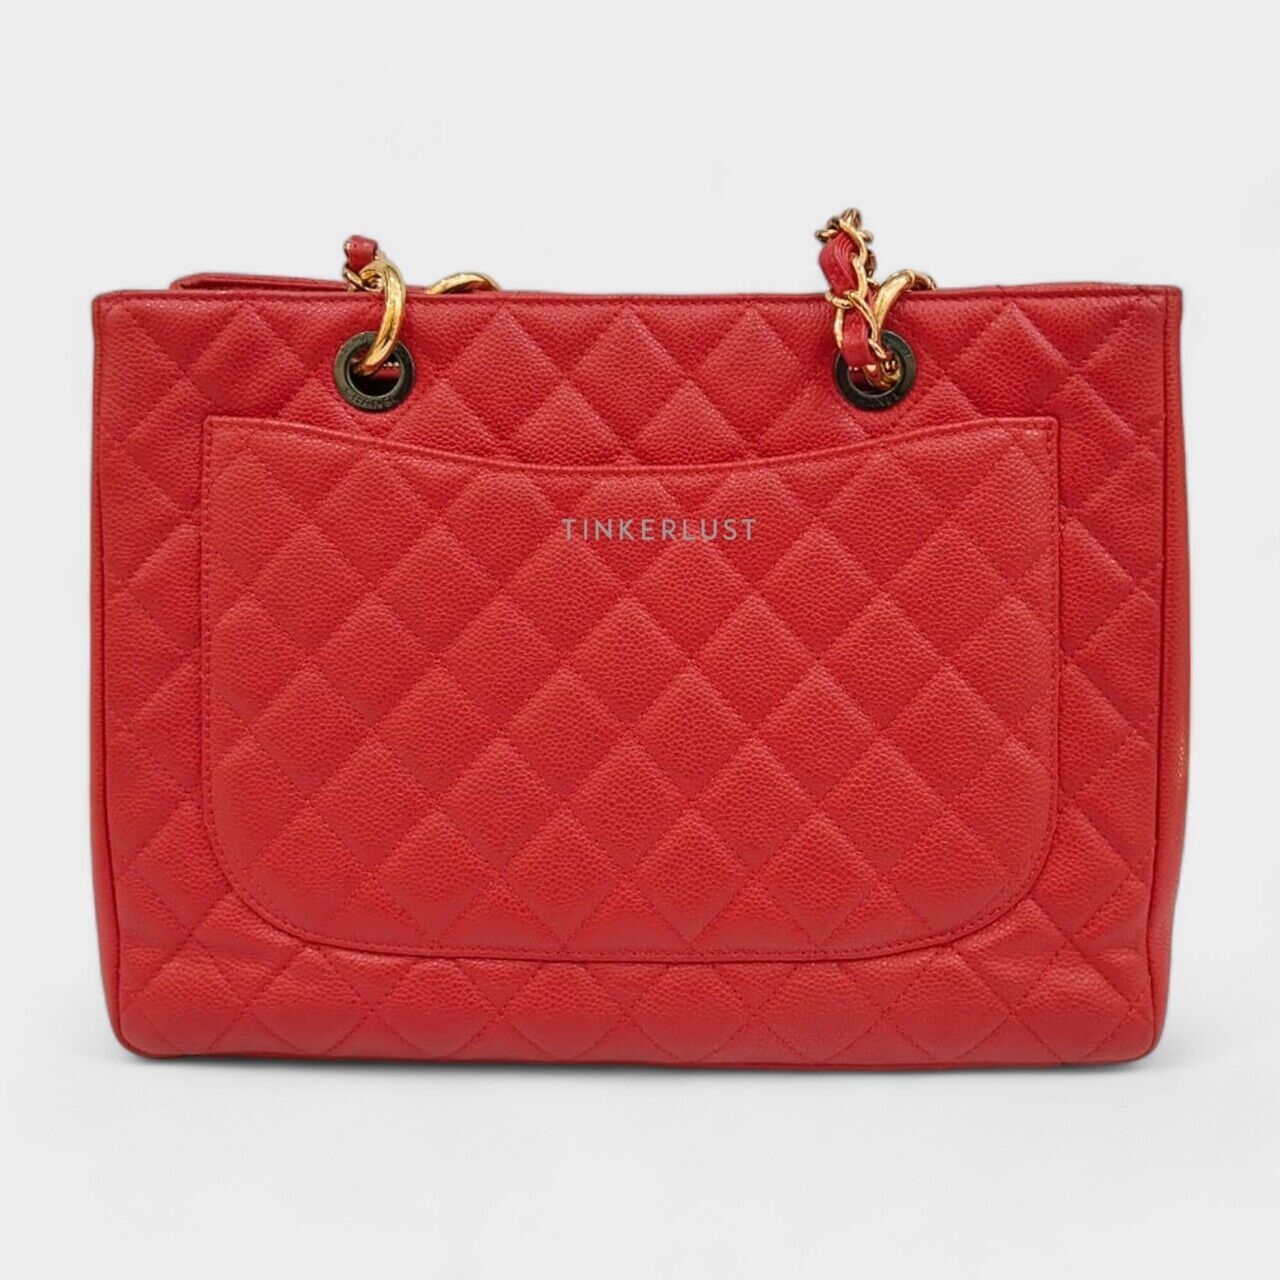 Chanel GST Grand Shopping Tote Red #18 GHW Tote Bag